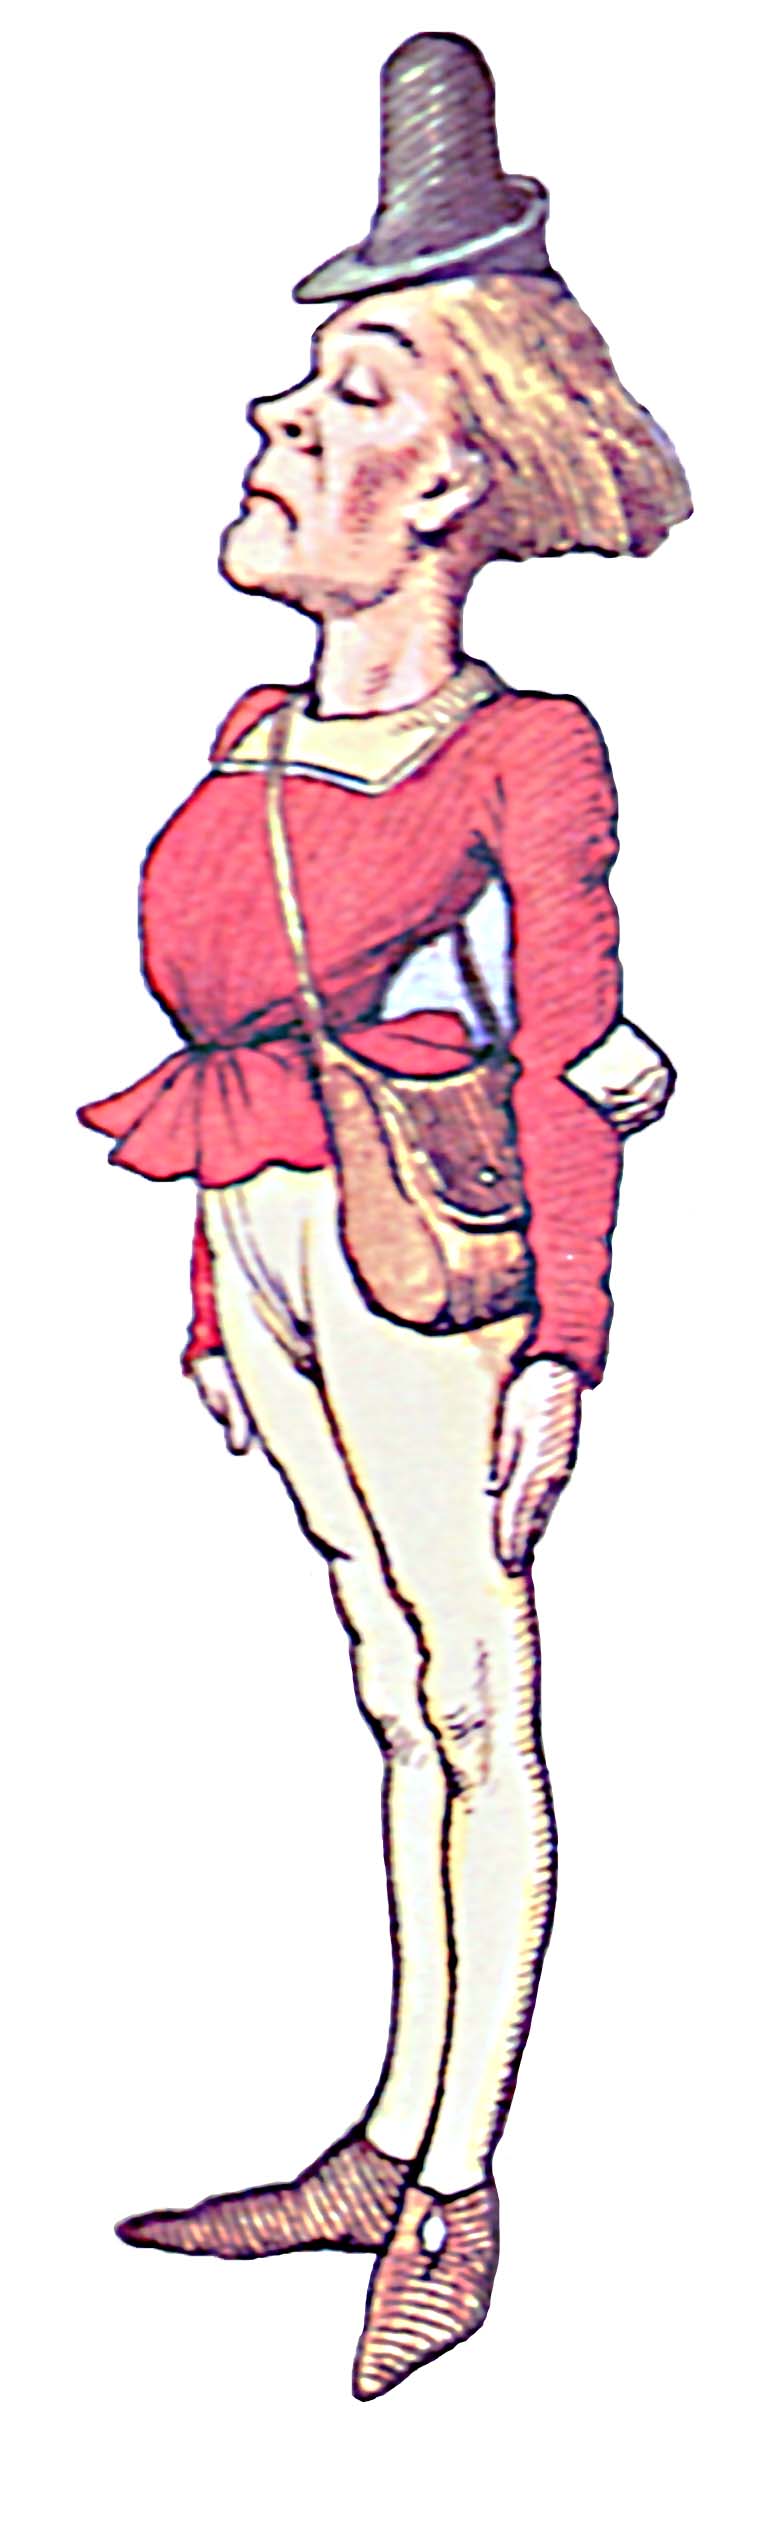 free clip art alice in wonderland characters - photo #33